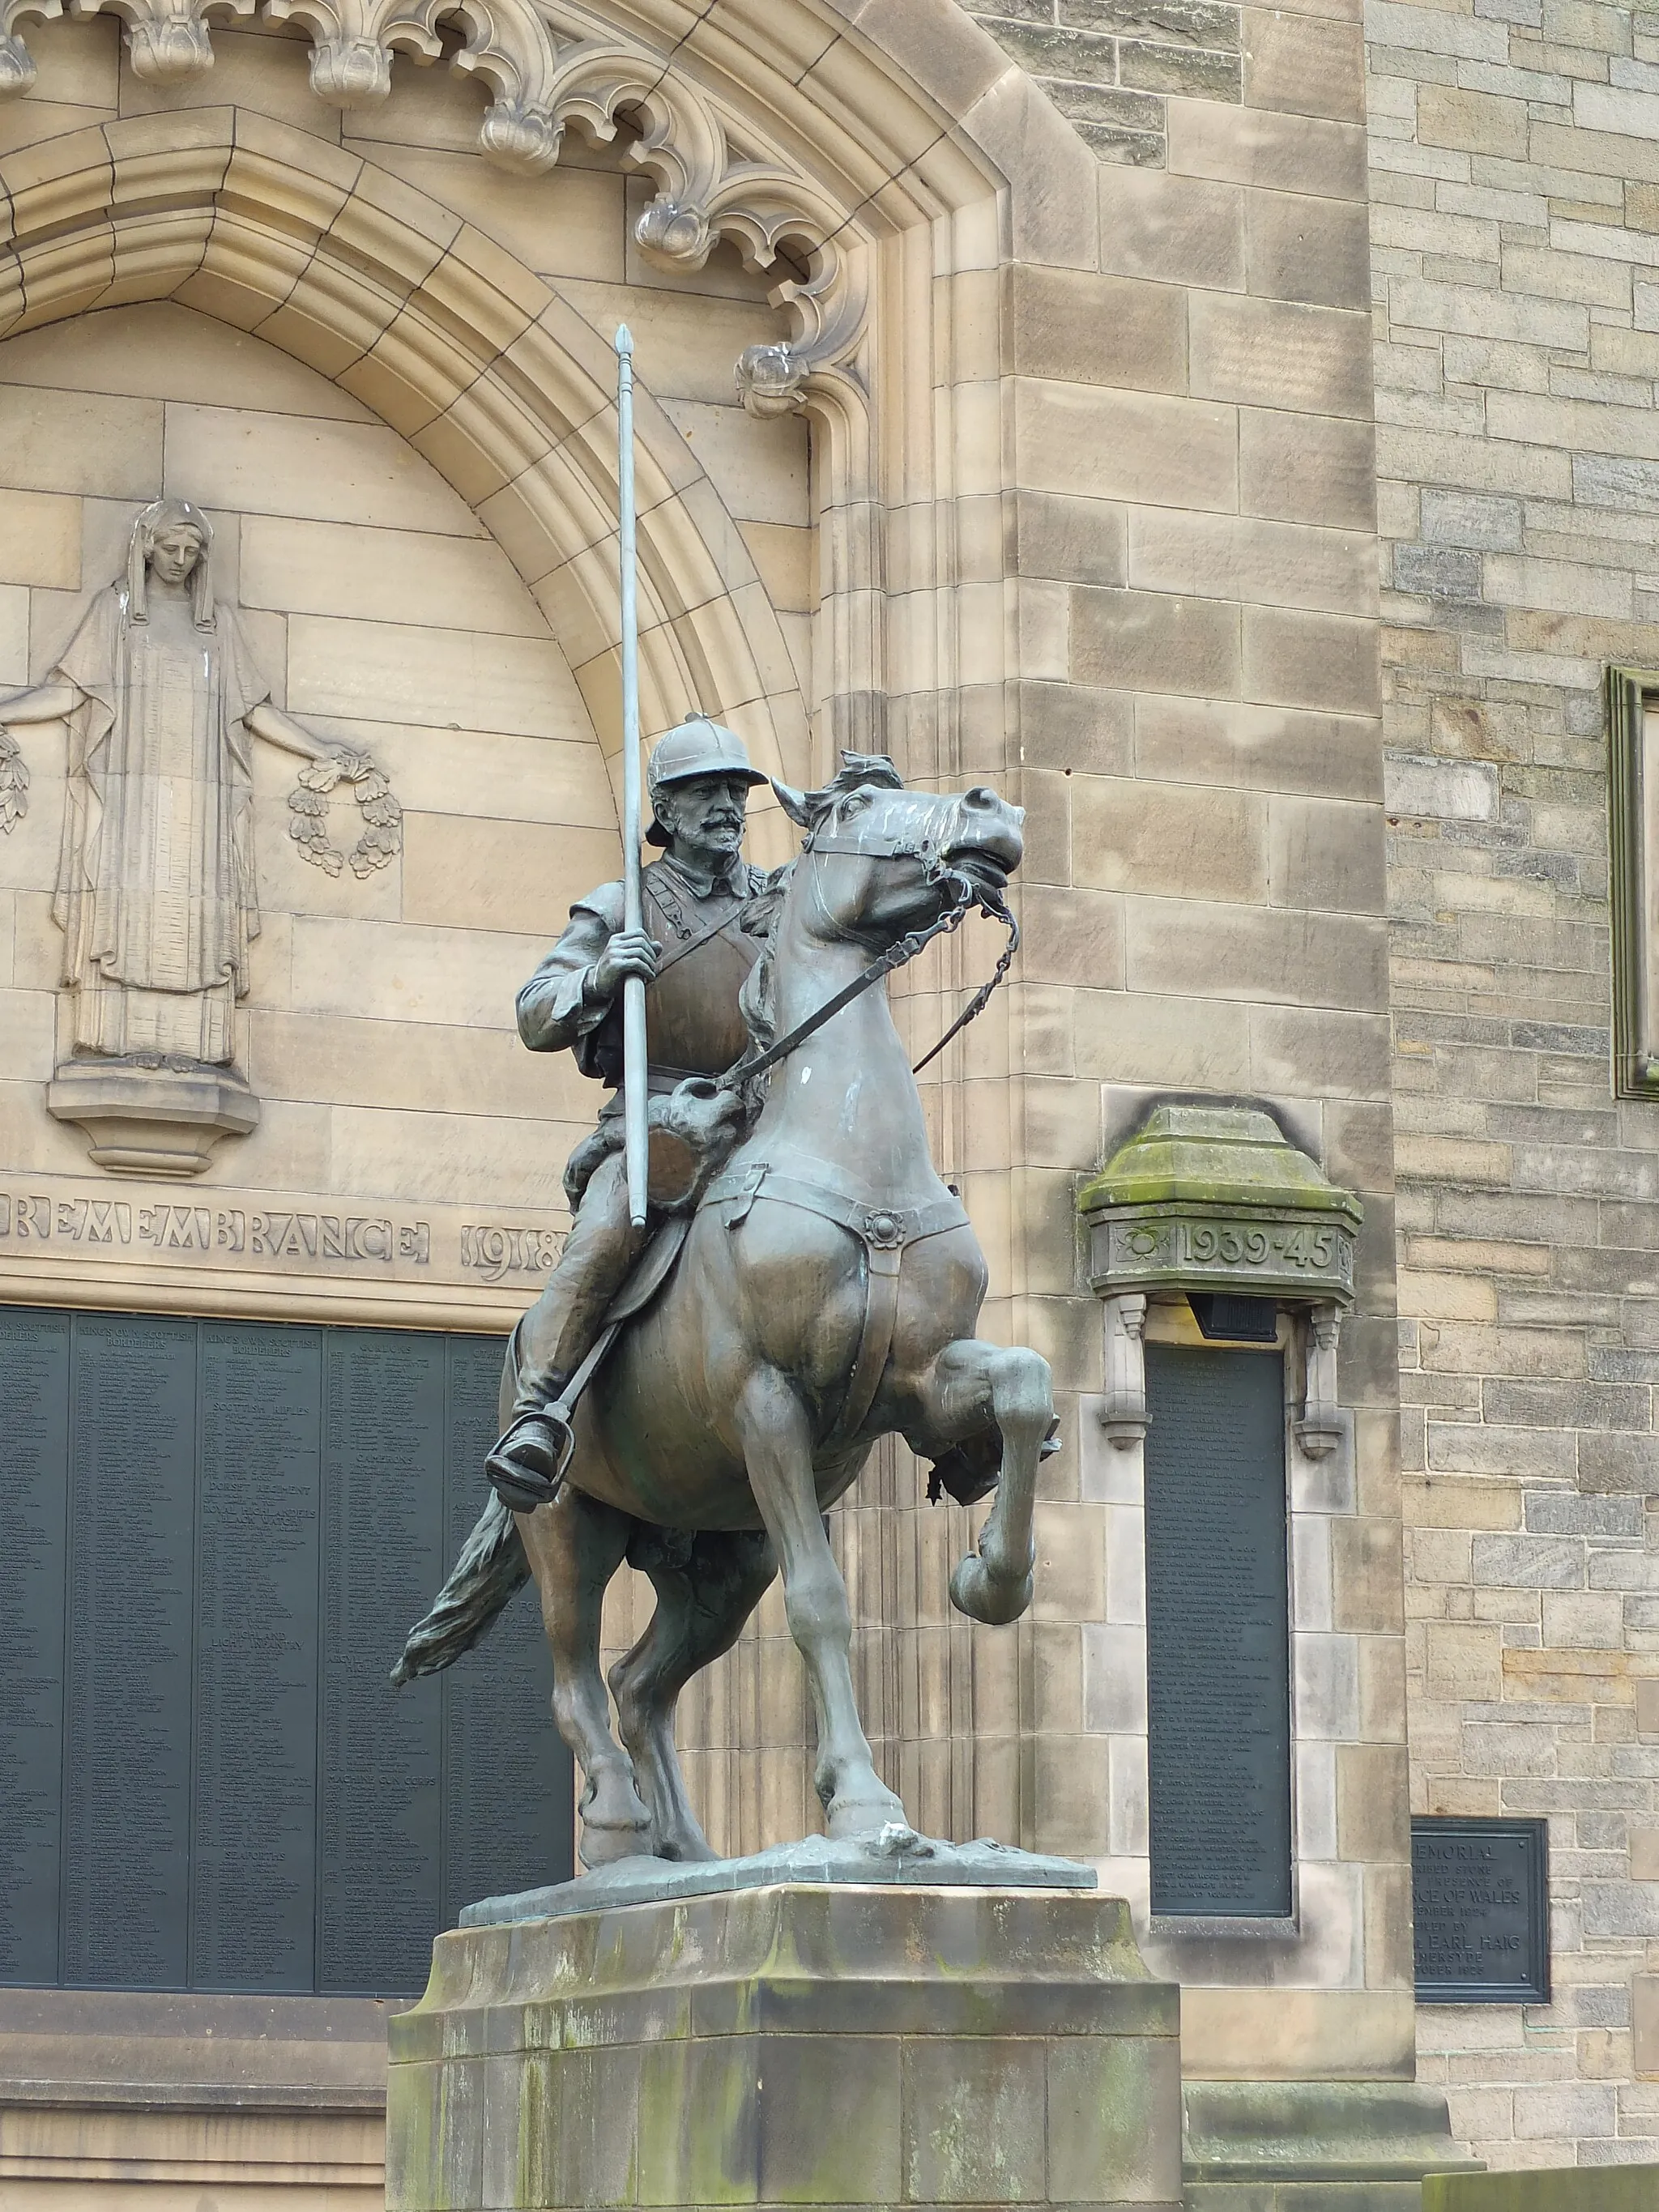 Photo showing: The statue in front of the War Memorial in Galashiels, known as the Reiver monument was sculpted by Thomas J. Clapperton (1879 - 1962). Clapperton was born in Galashiels, he studied  Galashiels Mechanics Institute where he won a scholarship to study at Glasgow School of Art. In 1906 he set up a studio in London.